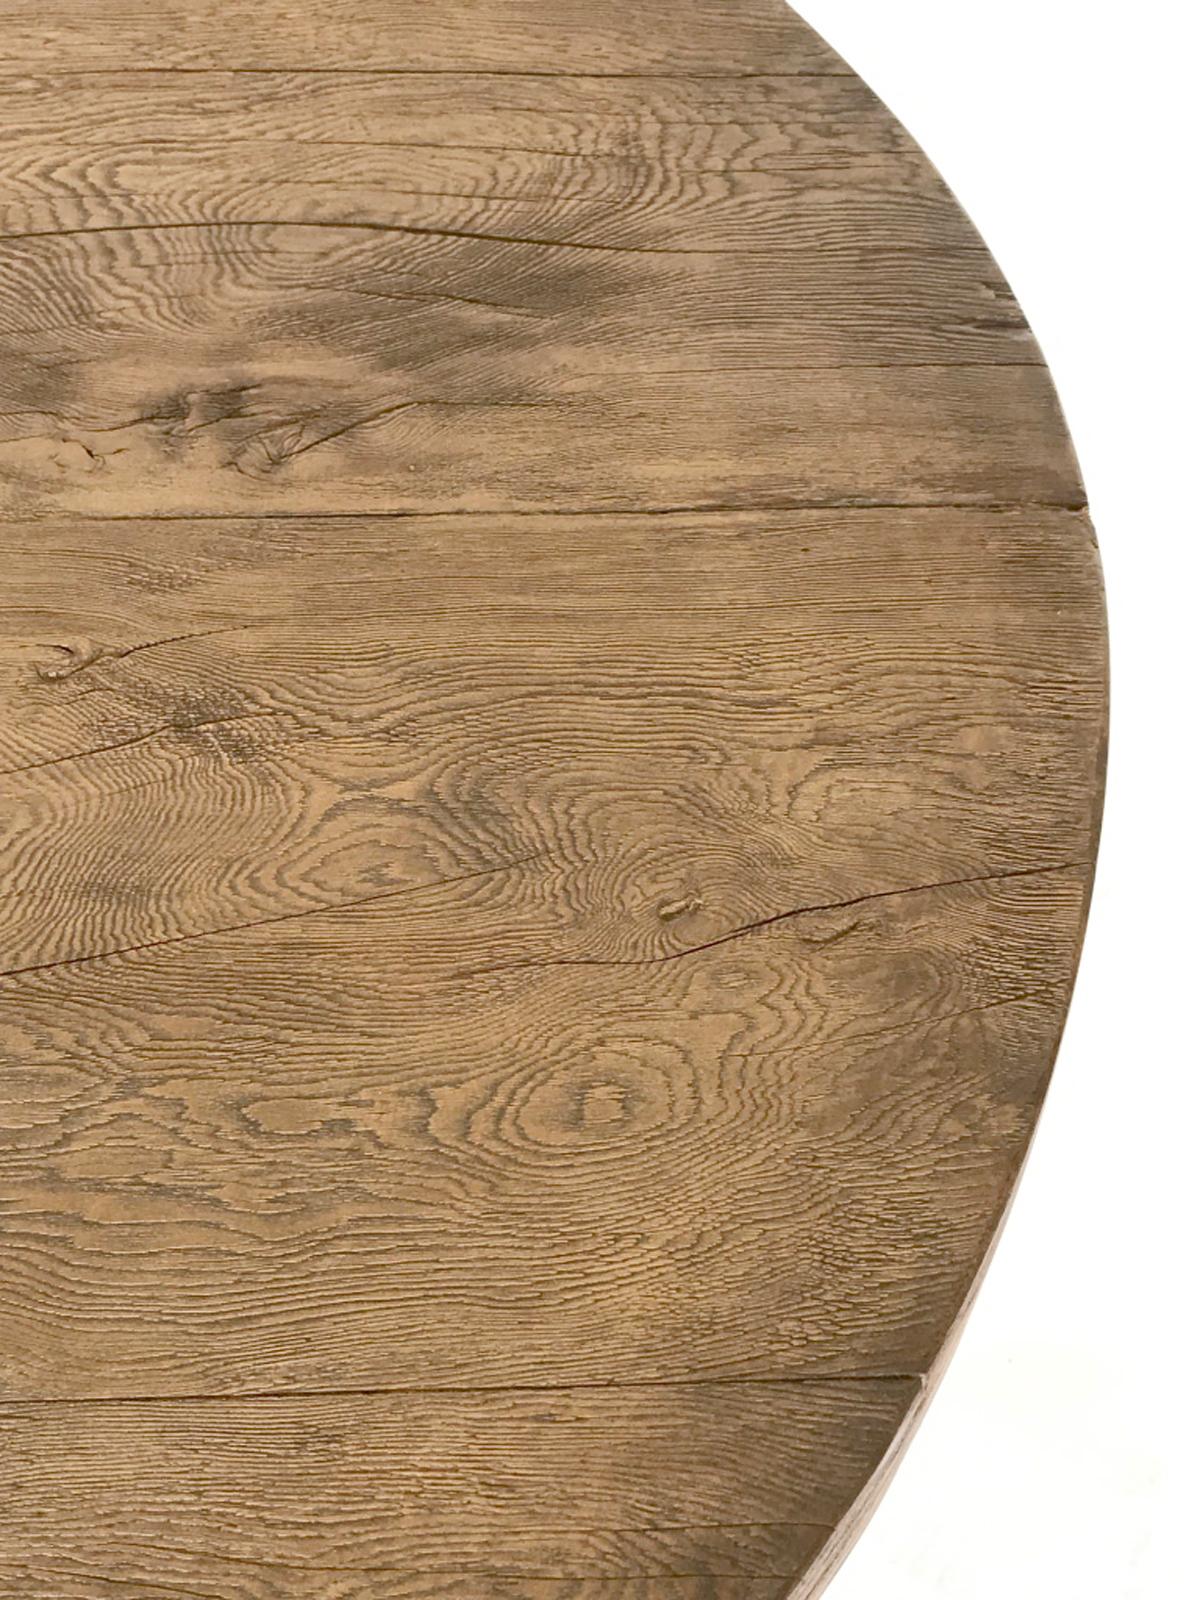 American Rustic Modern Round Pedestal Table by Dos Gallos Studio